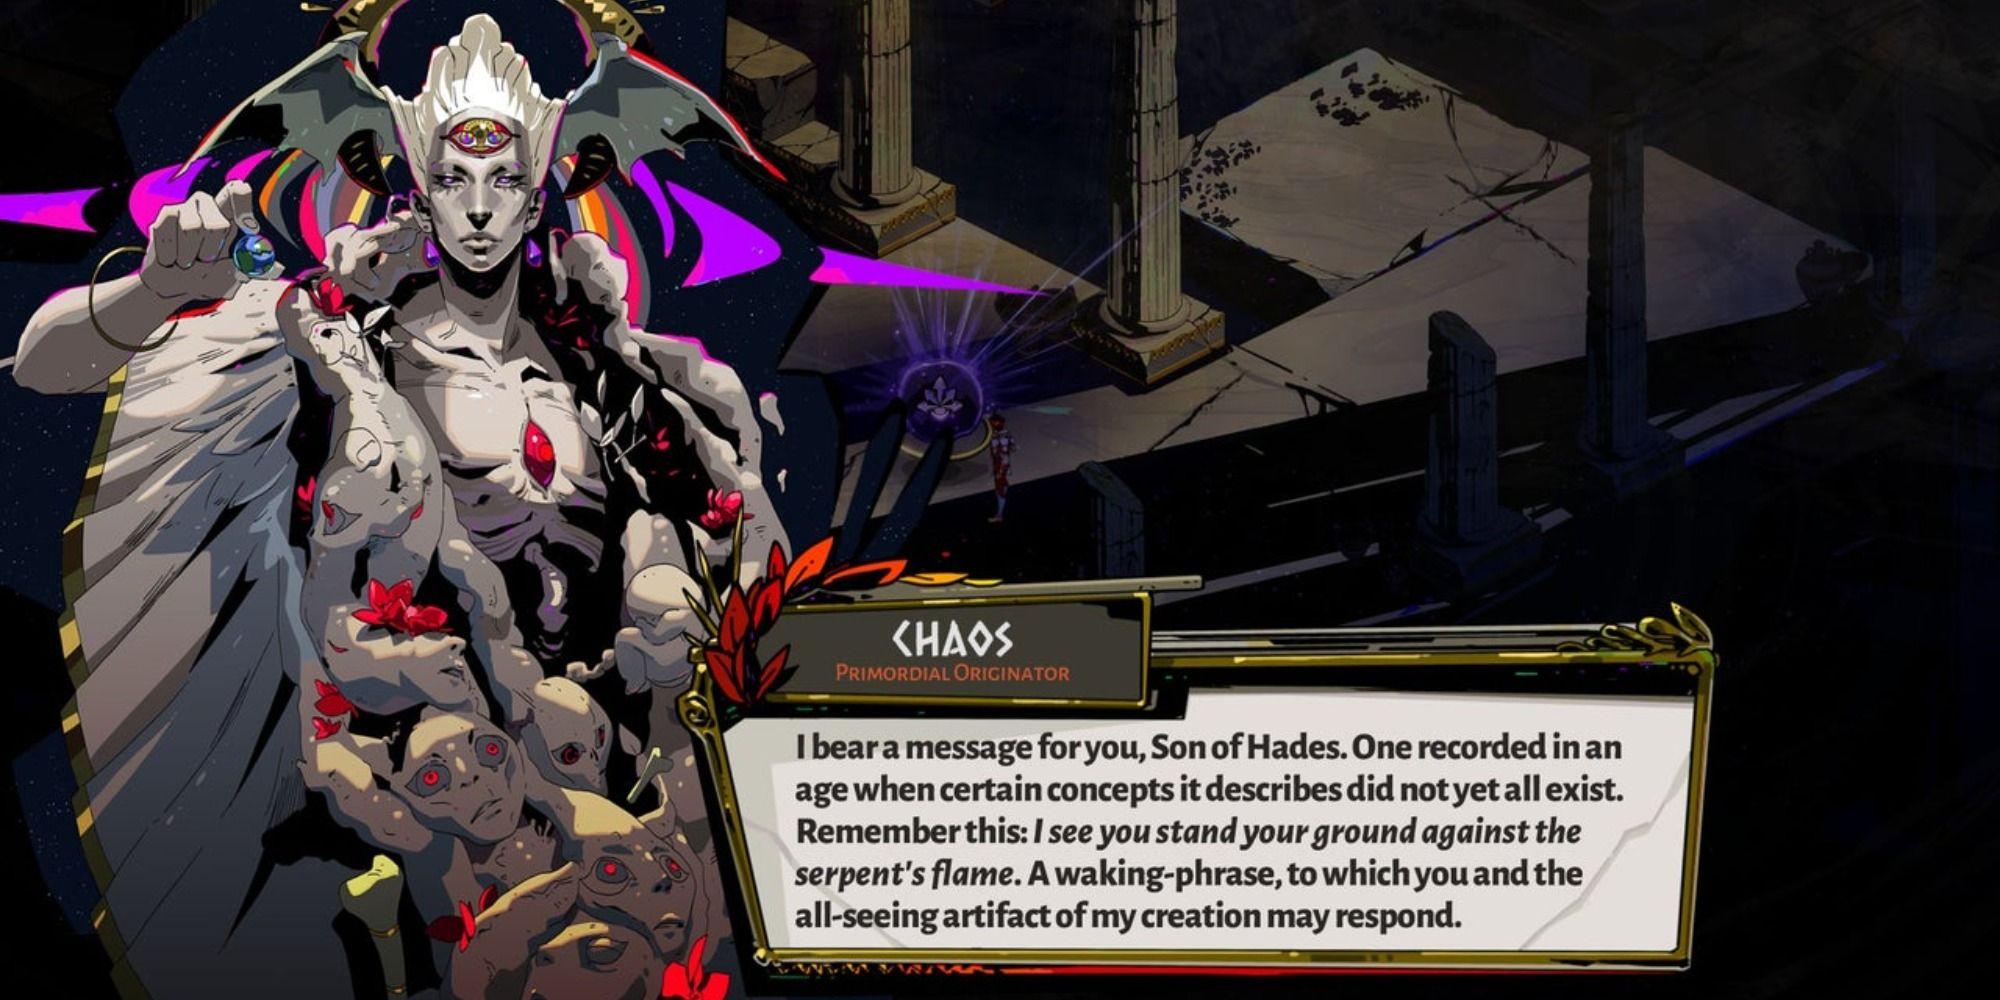 An image of Chaos talking to the player in Hades video game